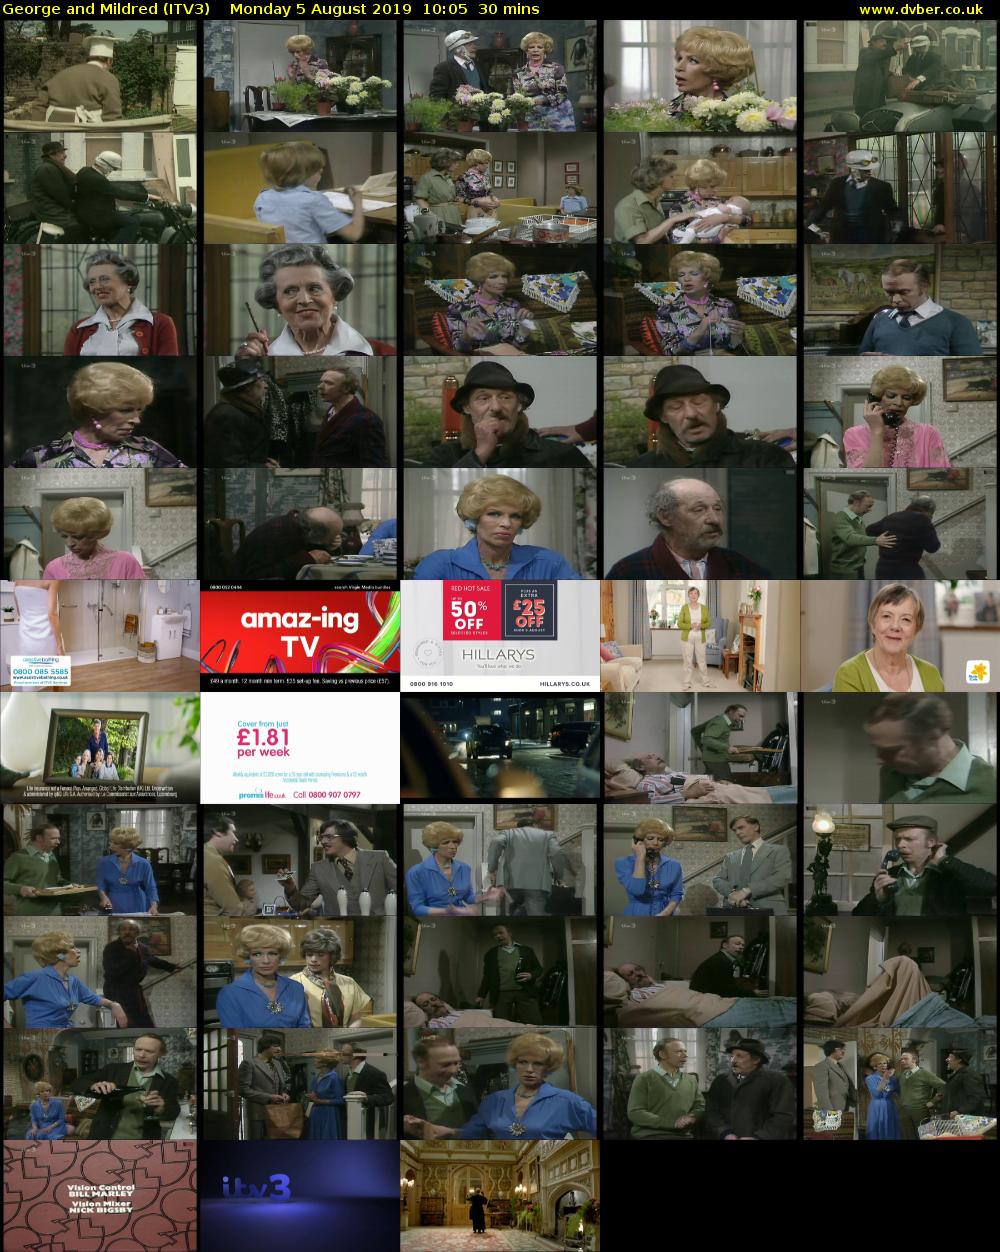 George and Mildred (ITV3) Monday 5 August 2019 10:05 - 10:35